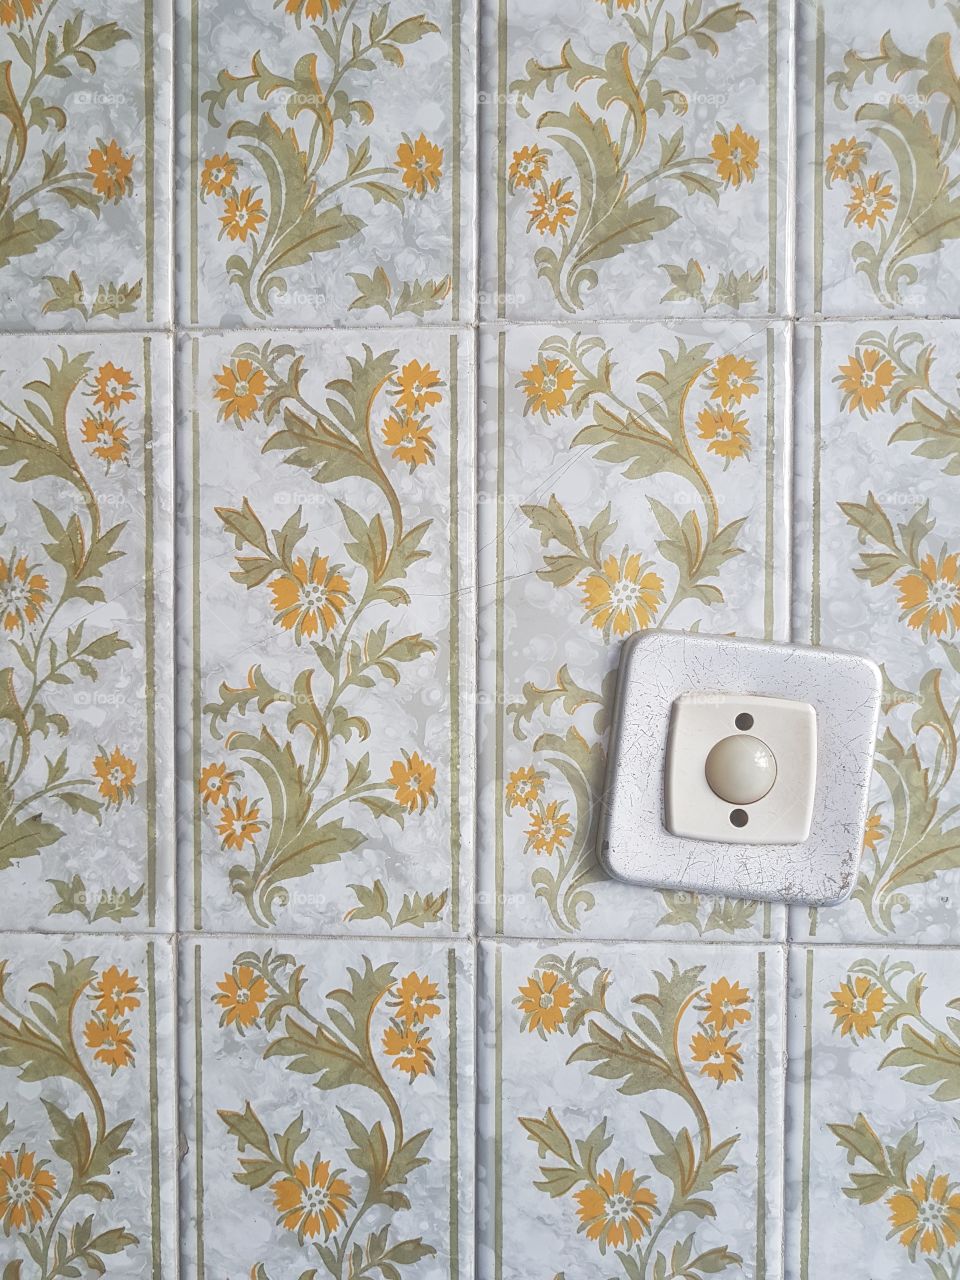 Wall tiles and light switch